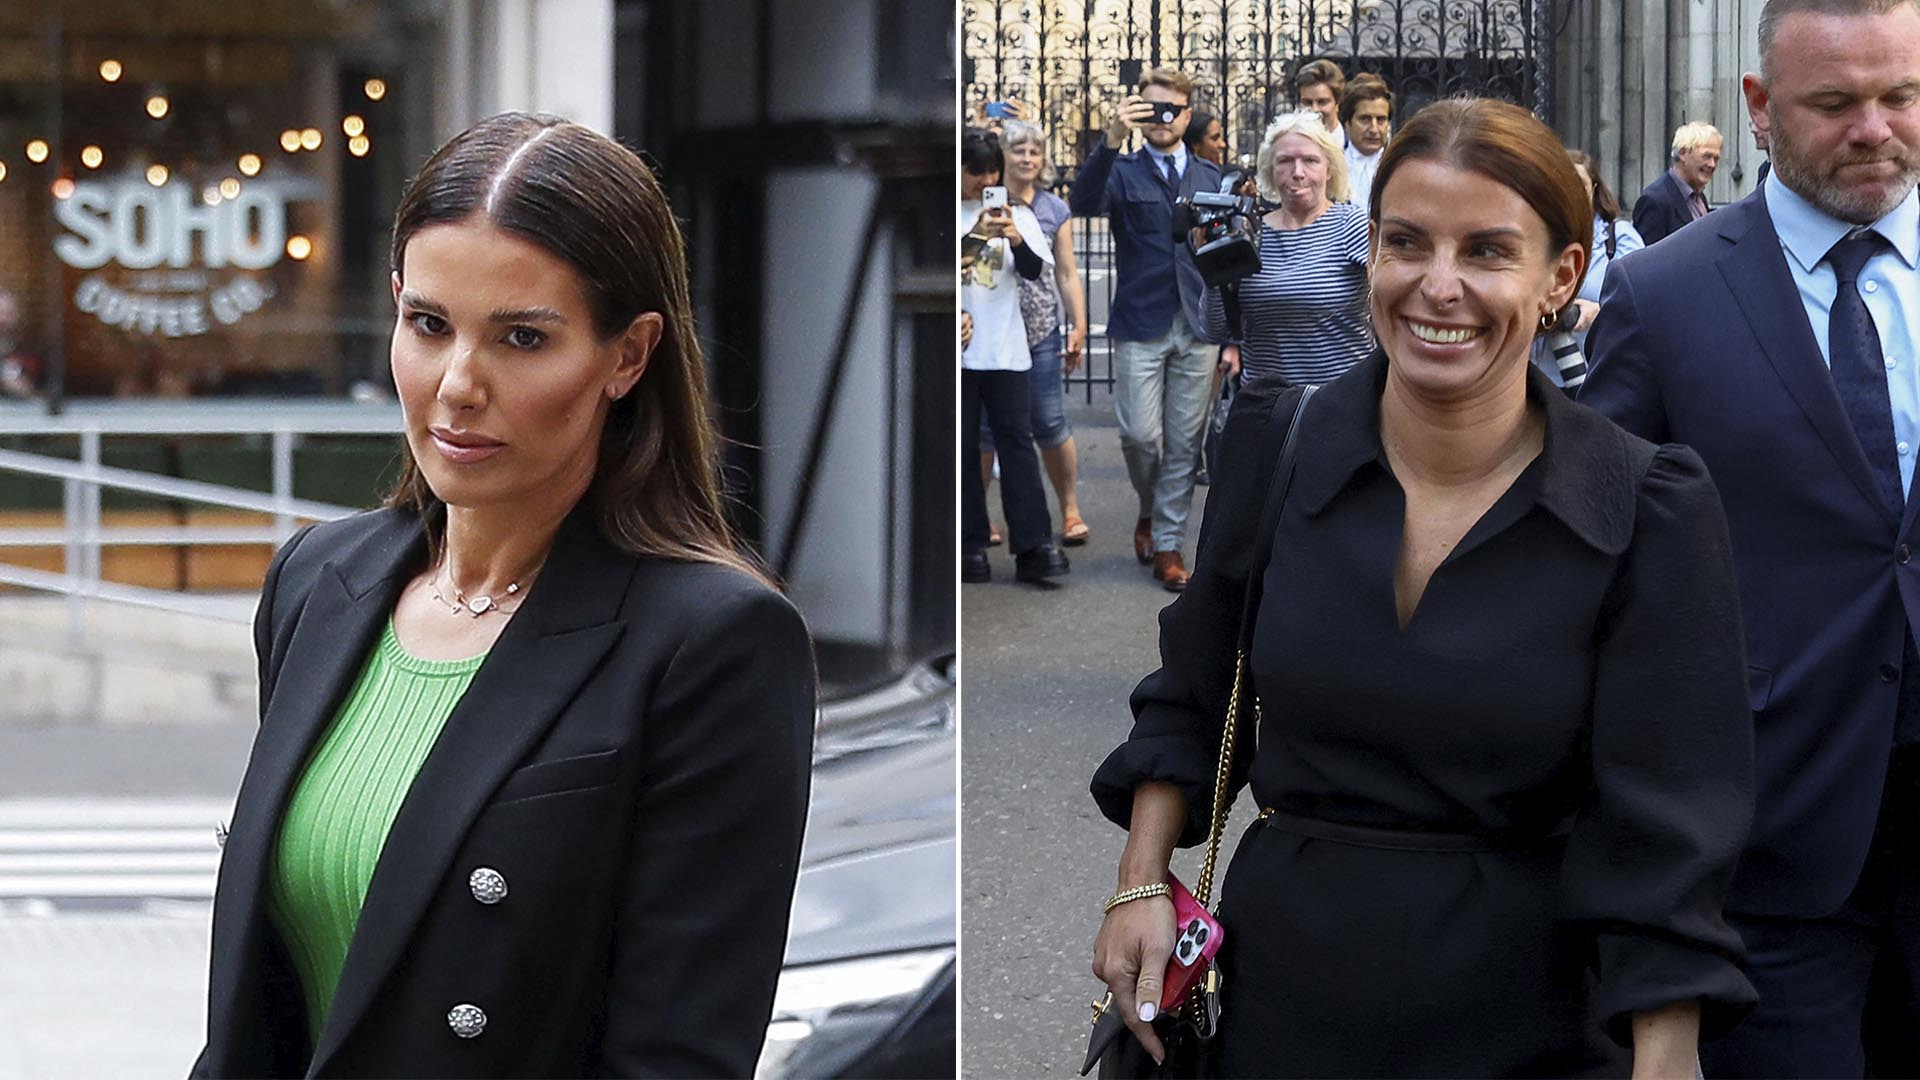 Rebekah Vardy and Coleen Rooney, protagonists of the media trial of the year in the United Kingdom